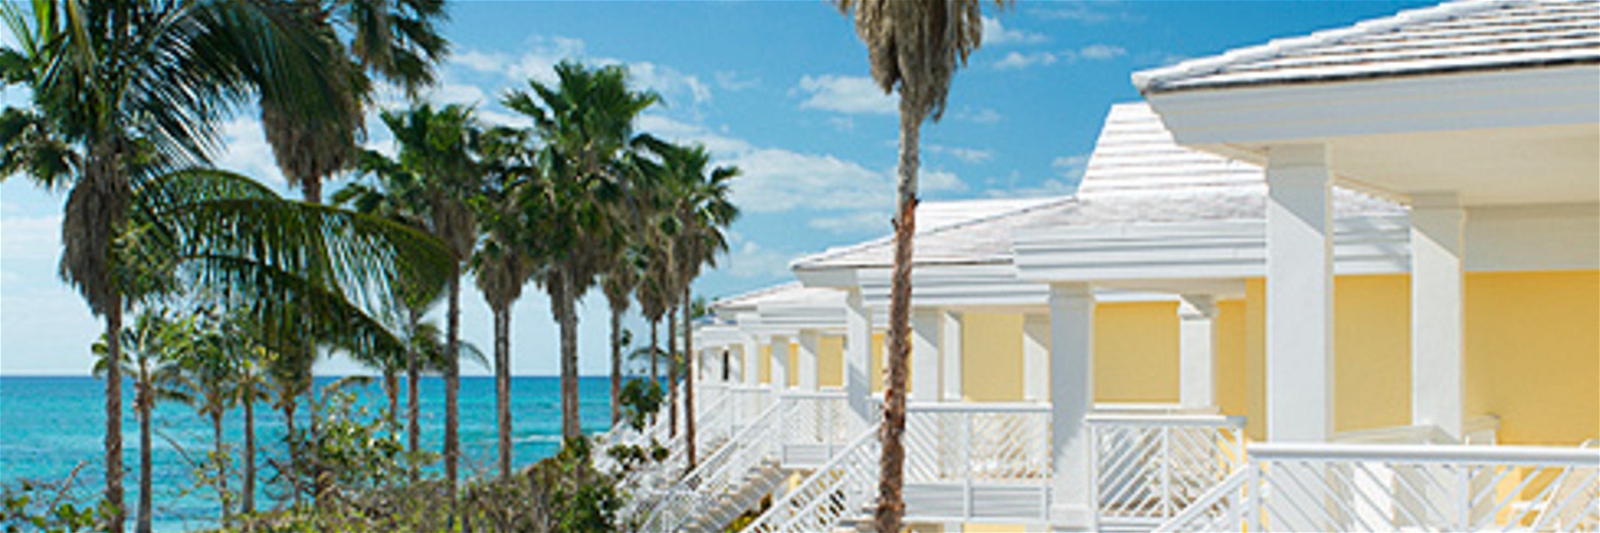 Golf Vacation Package - Lighthouse Pointe All Inclusive at Grand Lucayan Resort